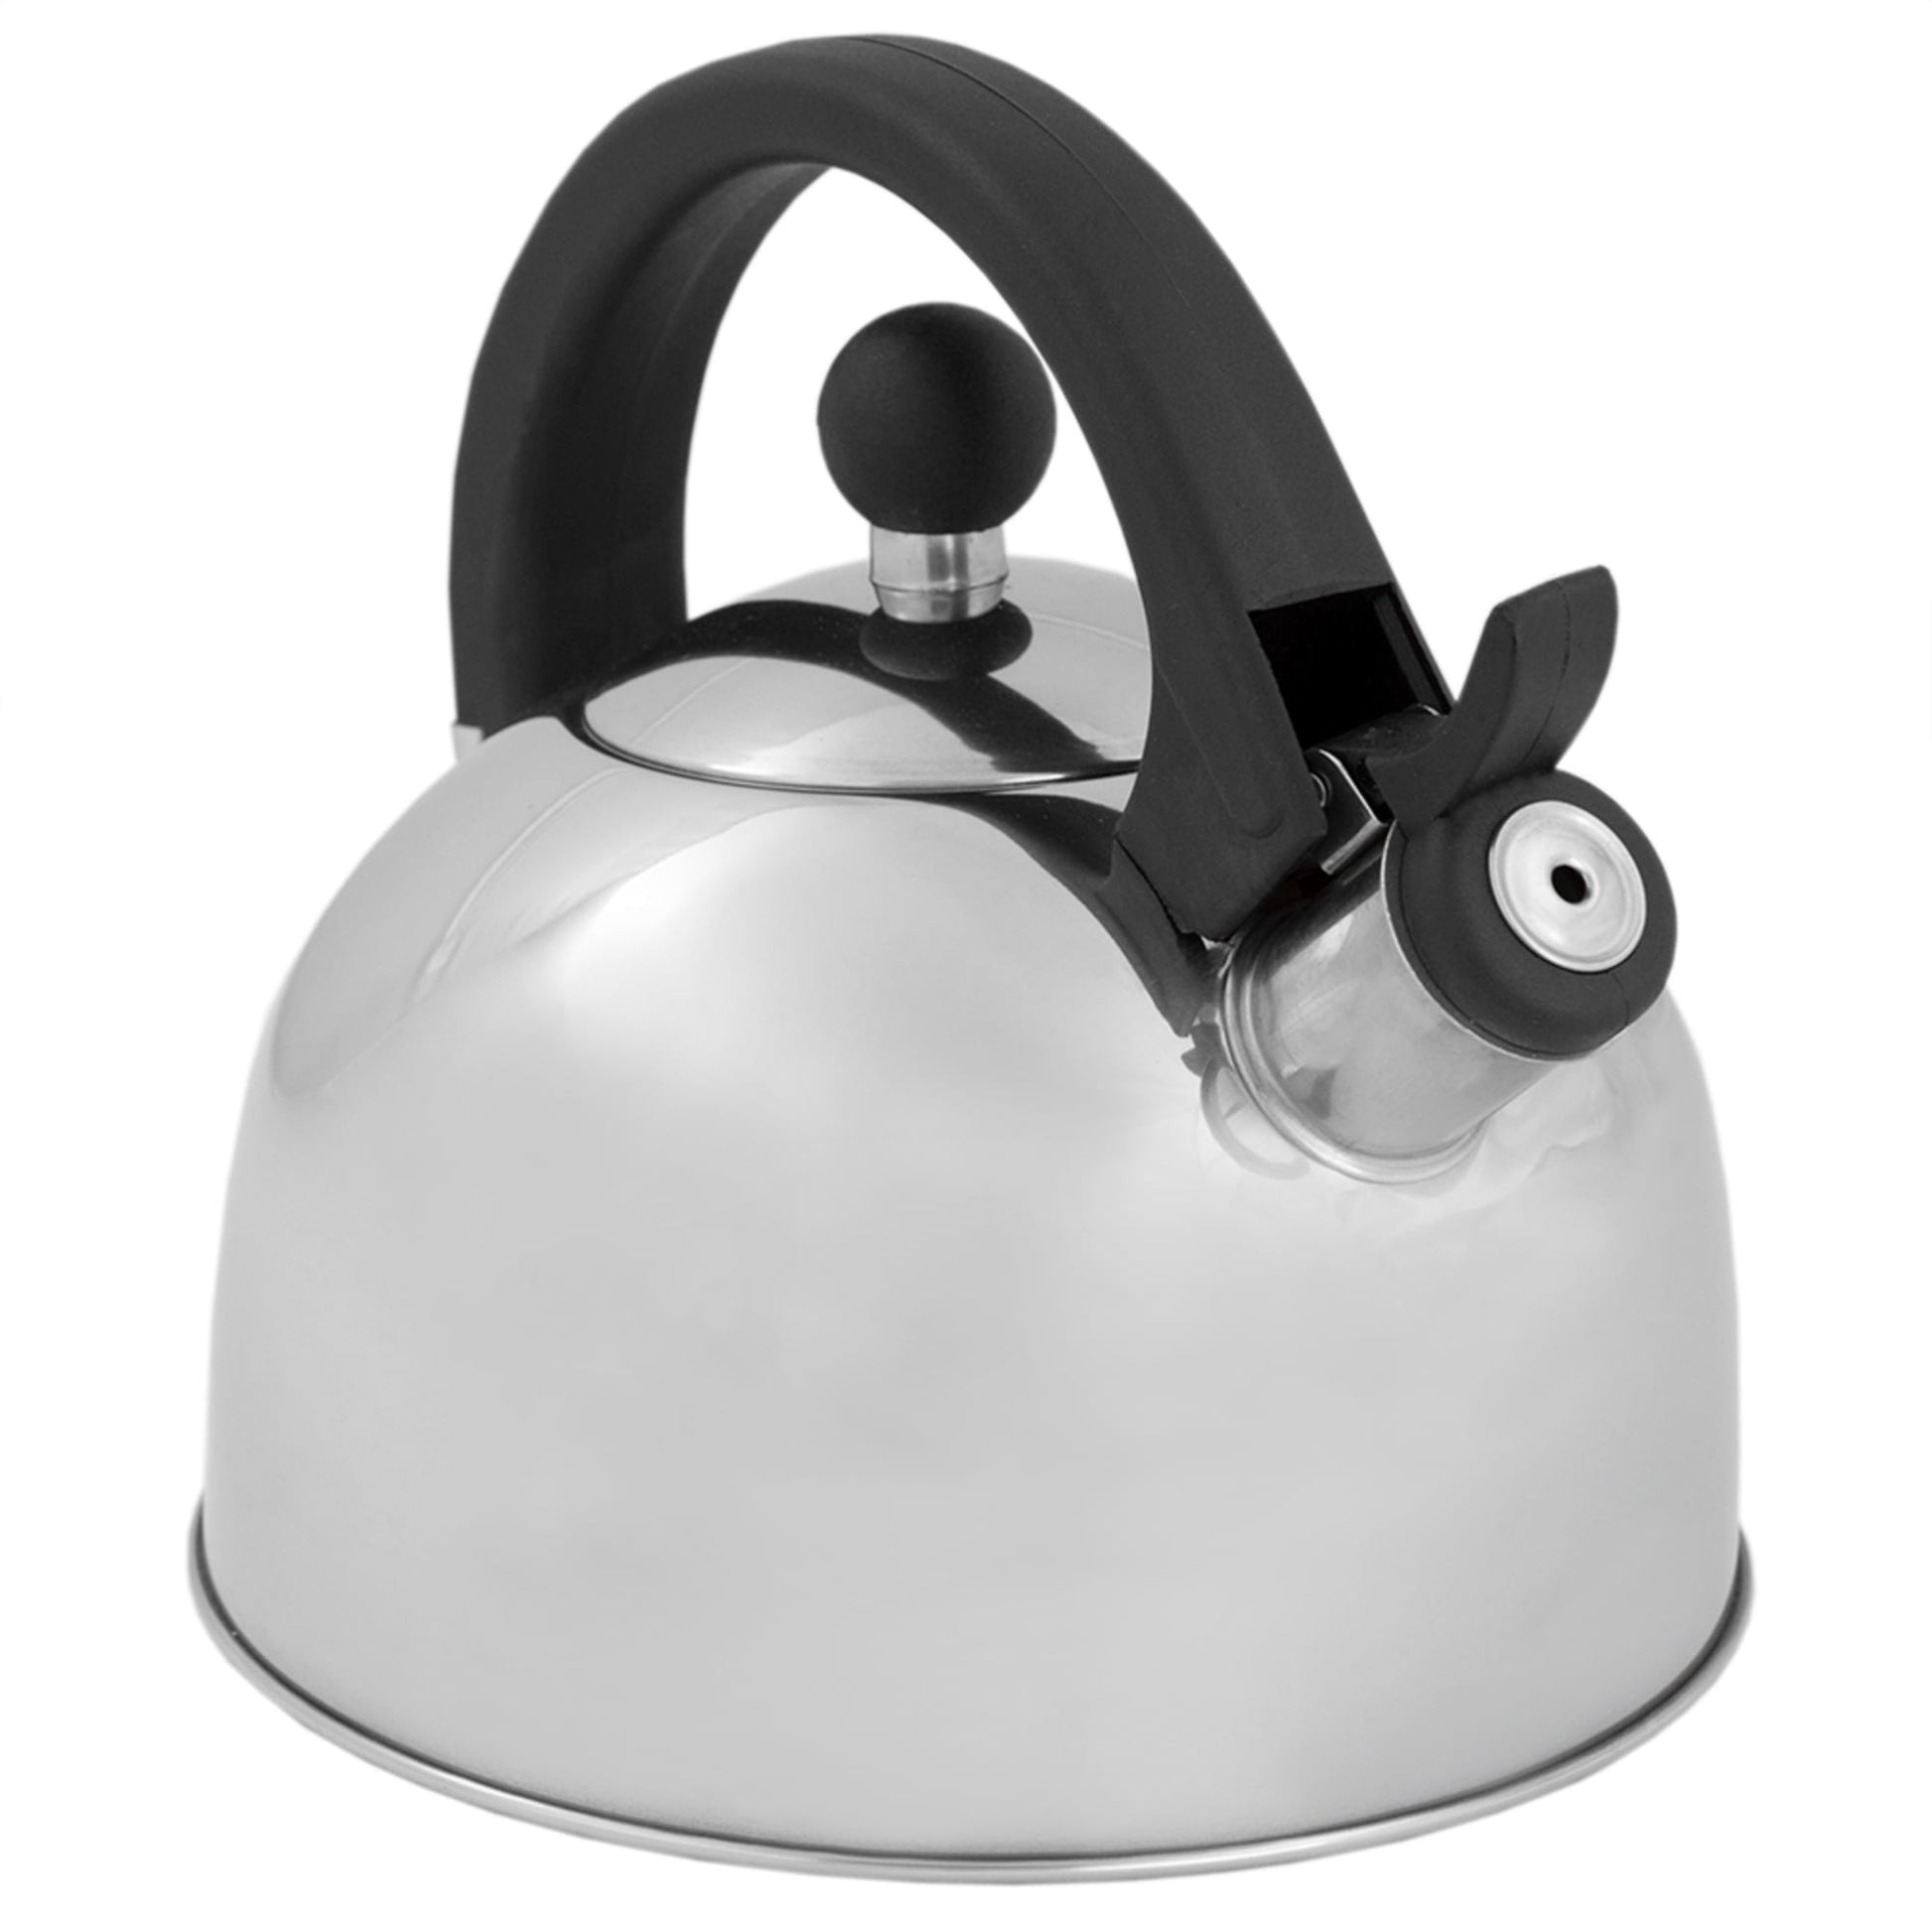 Life Smile - 3 Liter Stainless Steel Kettle   Induction  Bottom. Non-toxic nylon fix handle. Durable stainless steel, lightweight,  portable, easy to use, and safe. The bottom of the pot is